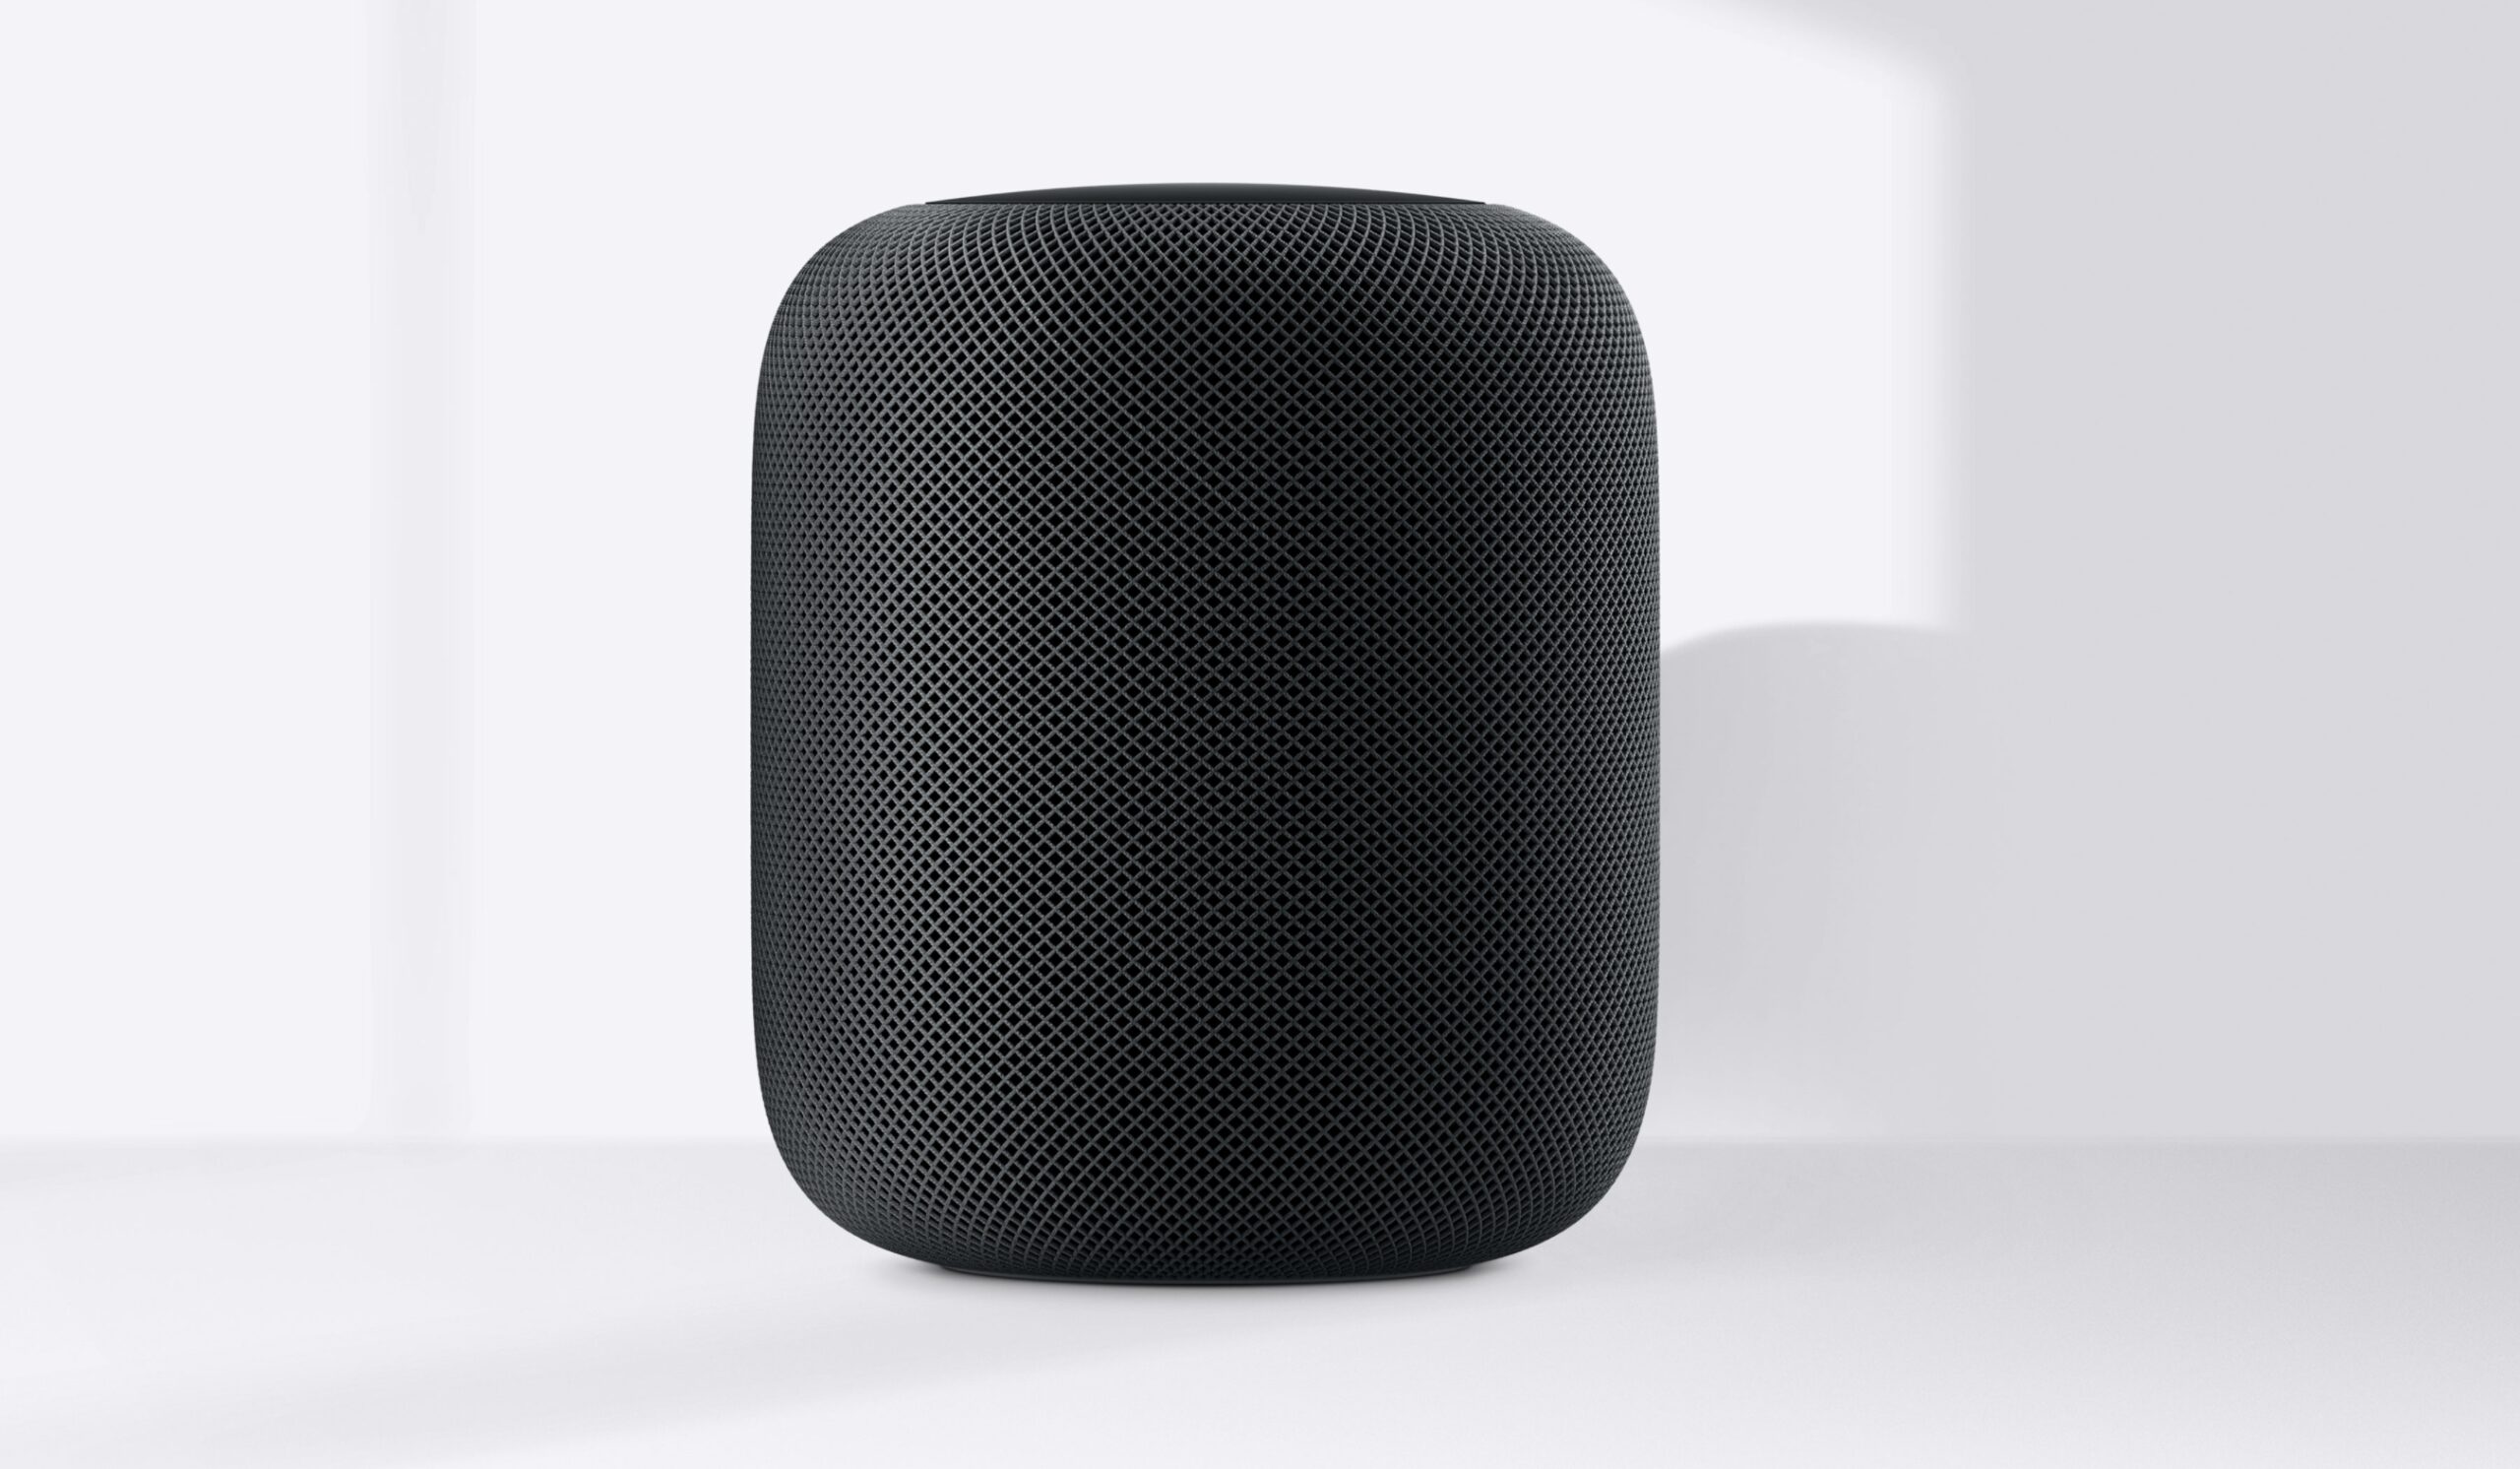 How to Disable Automatic Updates on HomePod Mini